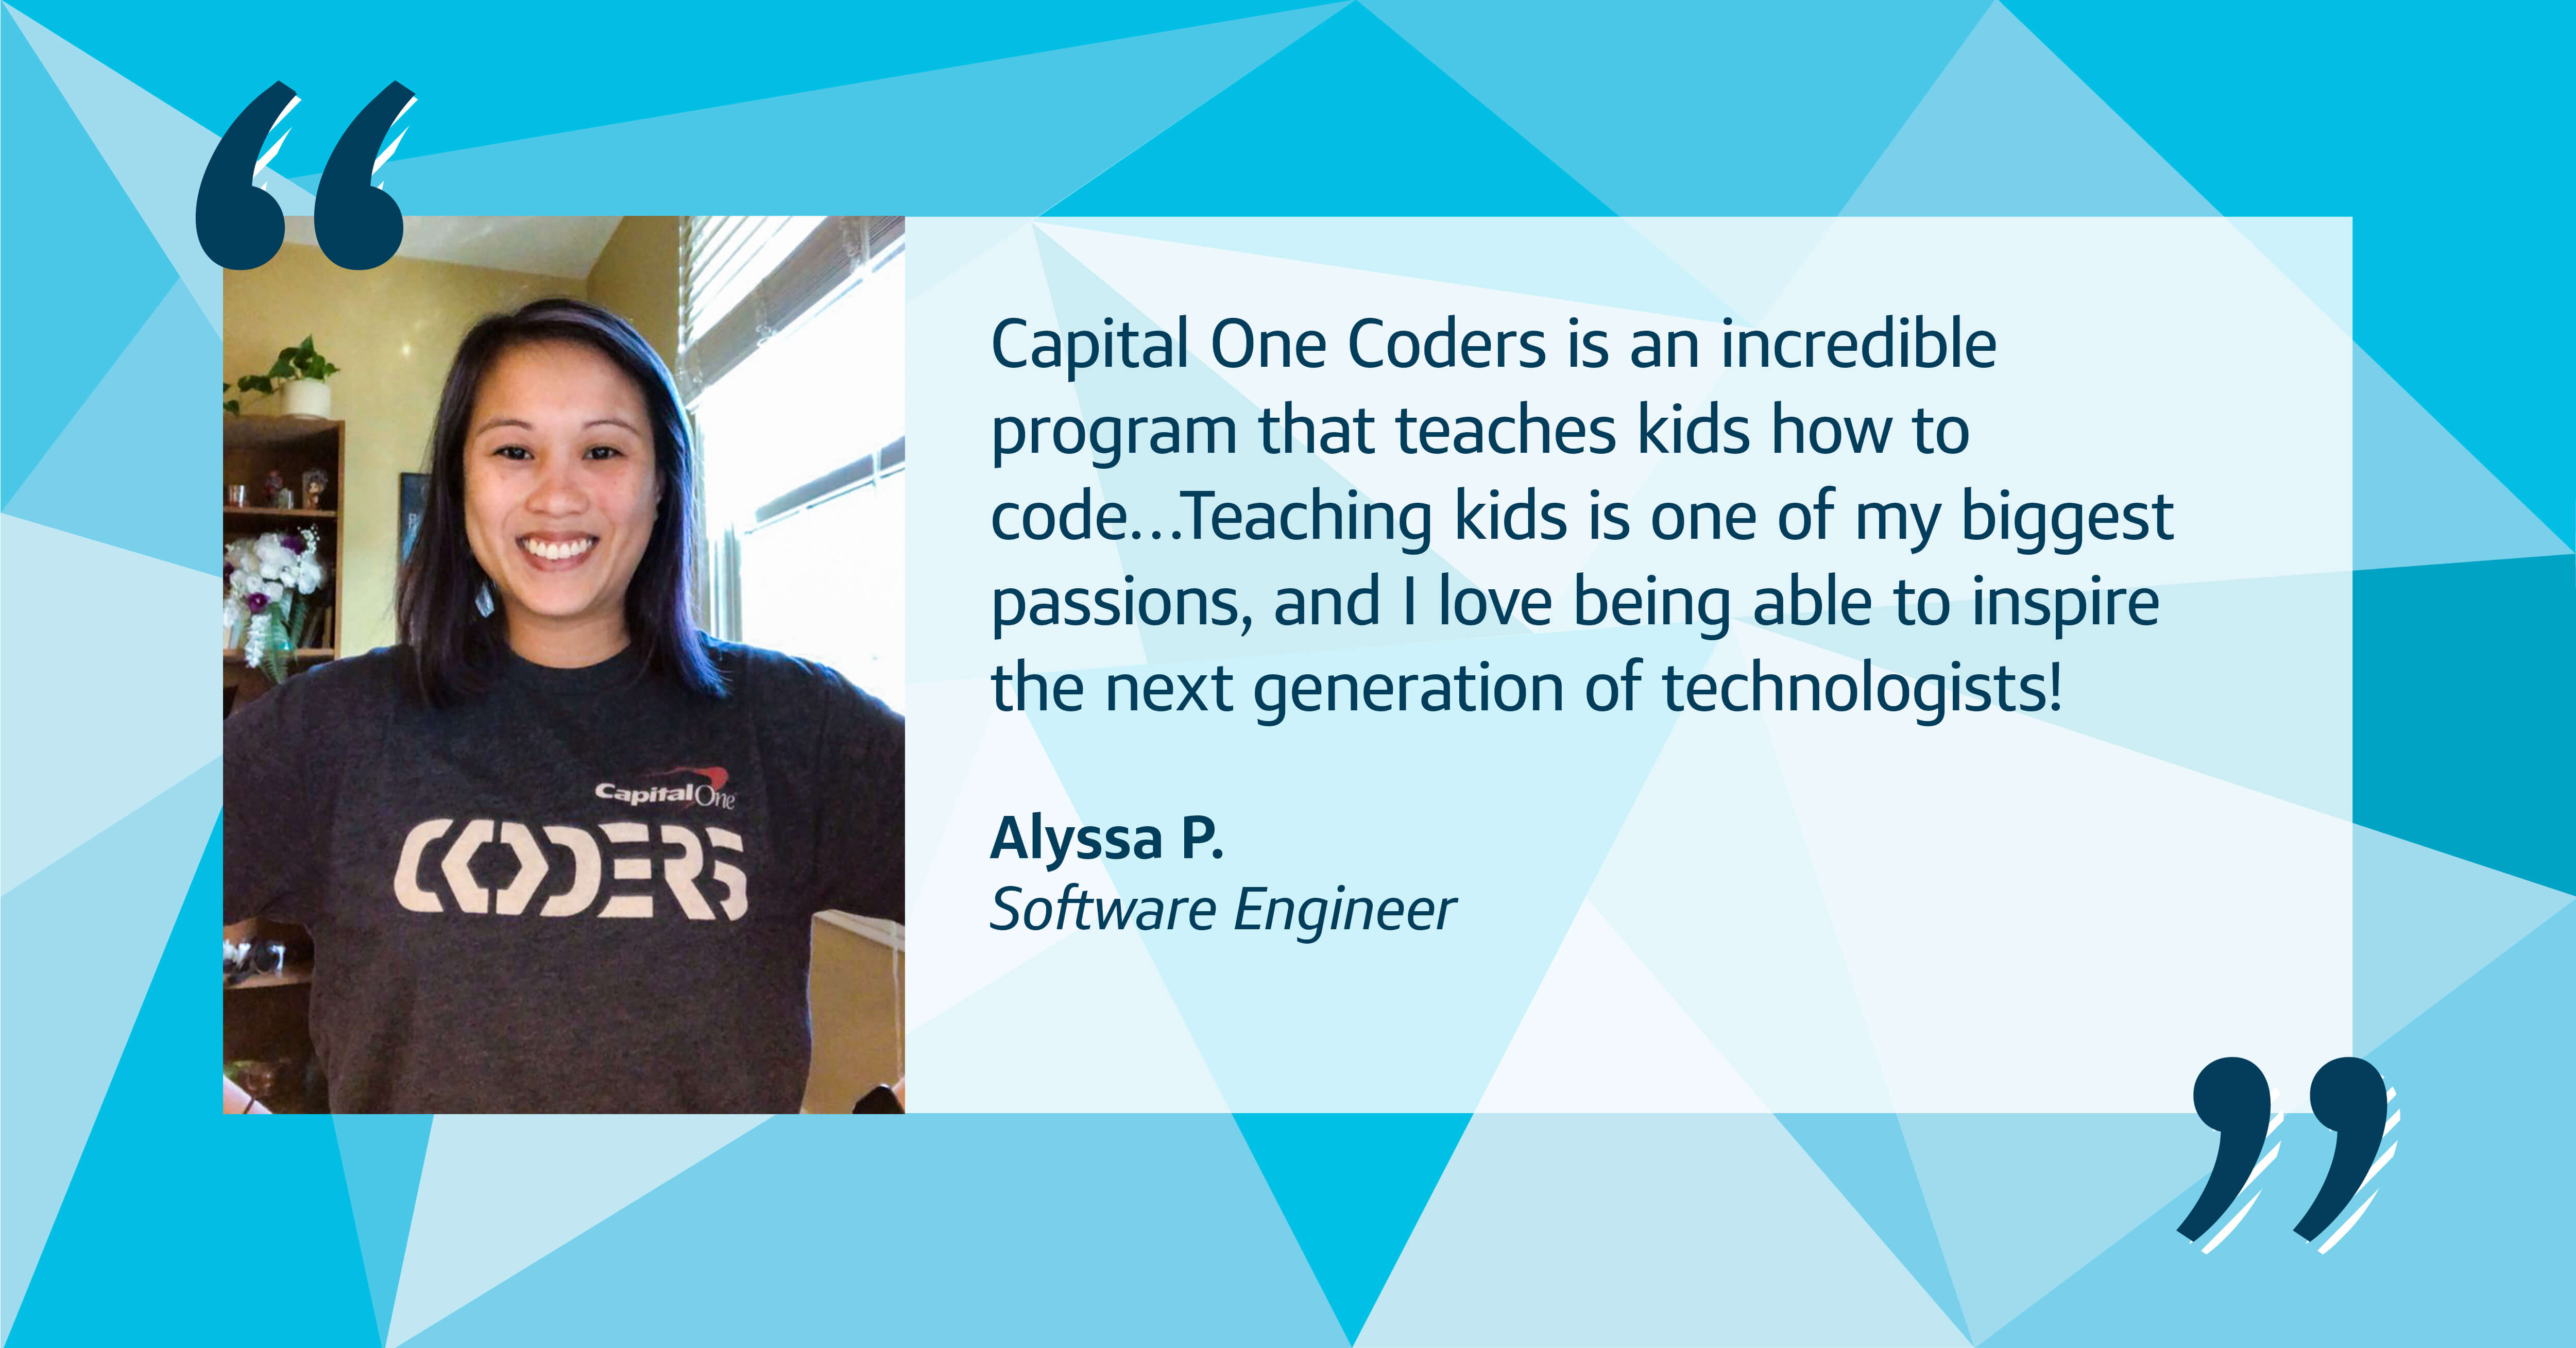 A picture of Capital One associate Alyssa wearing a Capital One CODERS shirt with a multi-blue triangular background with a quote from her that says, "Capital One Coders is an incredible program that teaches kids how to code...Teaching kids is one of my biggest passions, and I love being able to inspire the next generation of technologists!" Alyssa P., Software Engineer